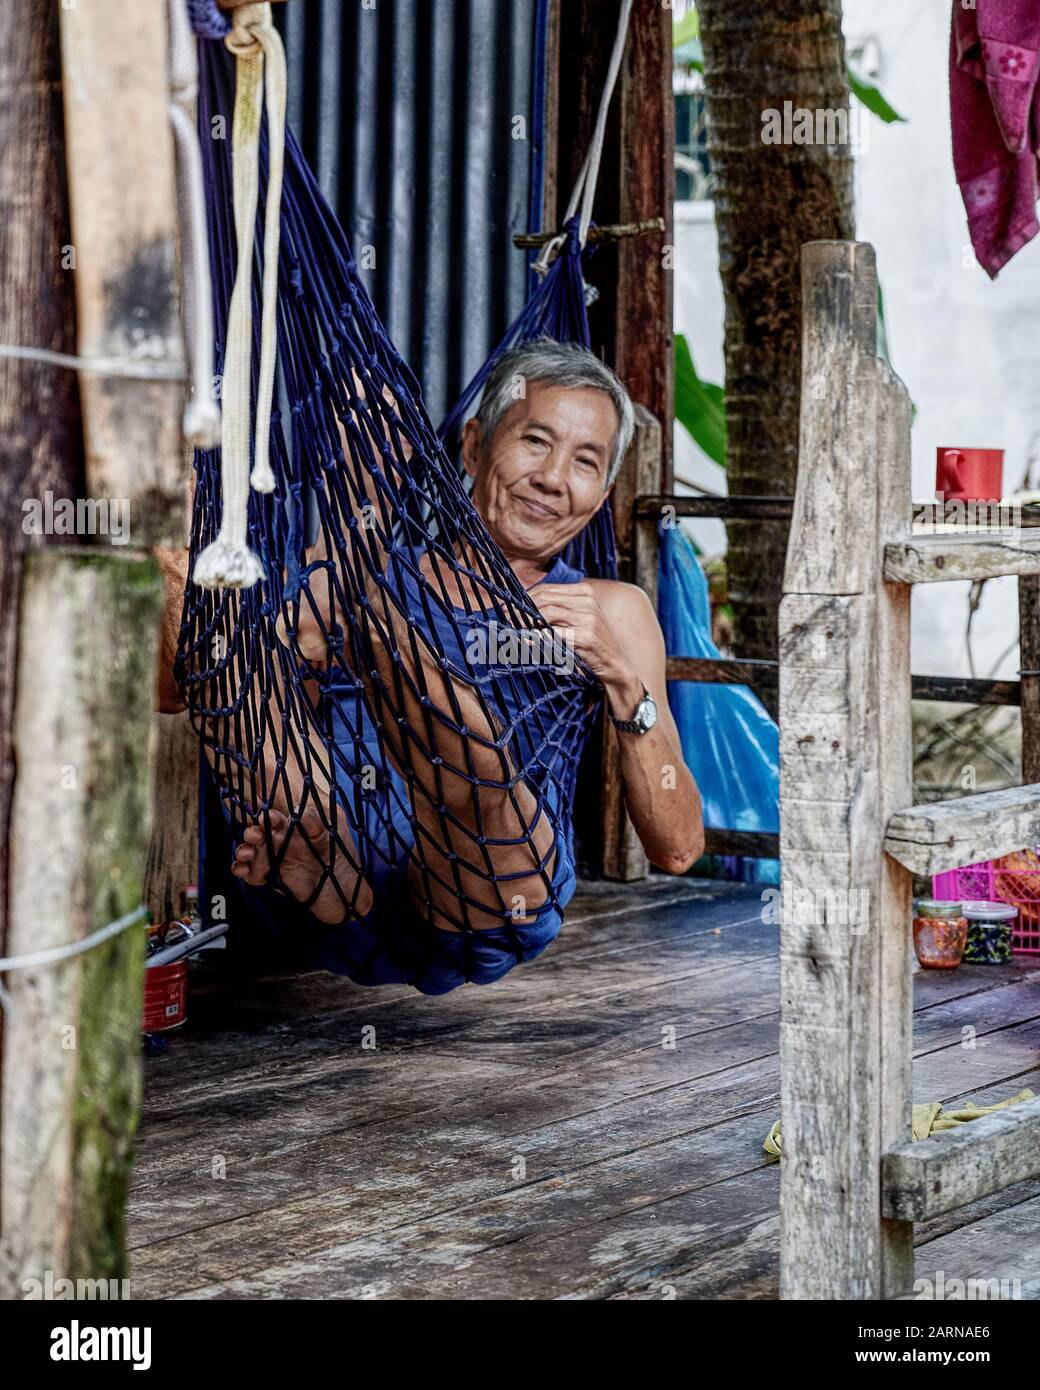 Morning’s work done. Time to siesta in the home hammock. Vietnamese people are professional nappers. Stock Photo